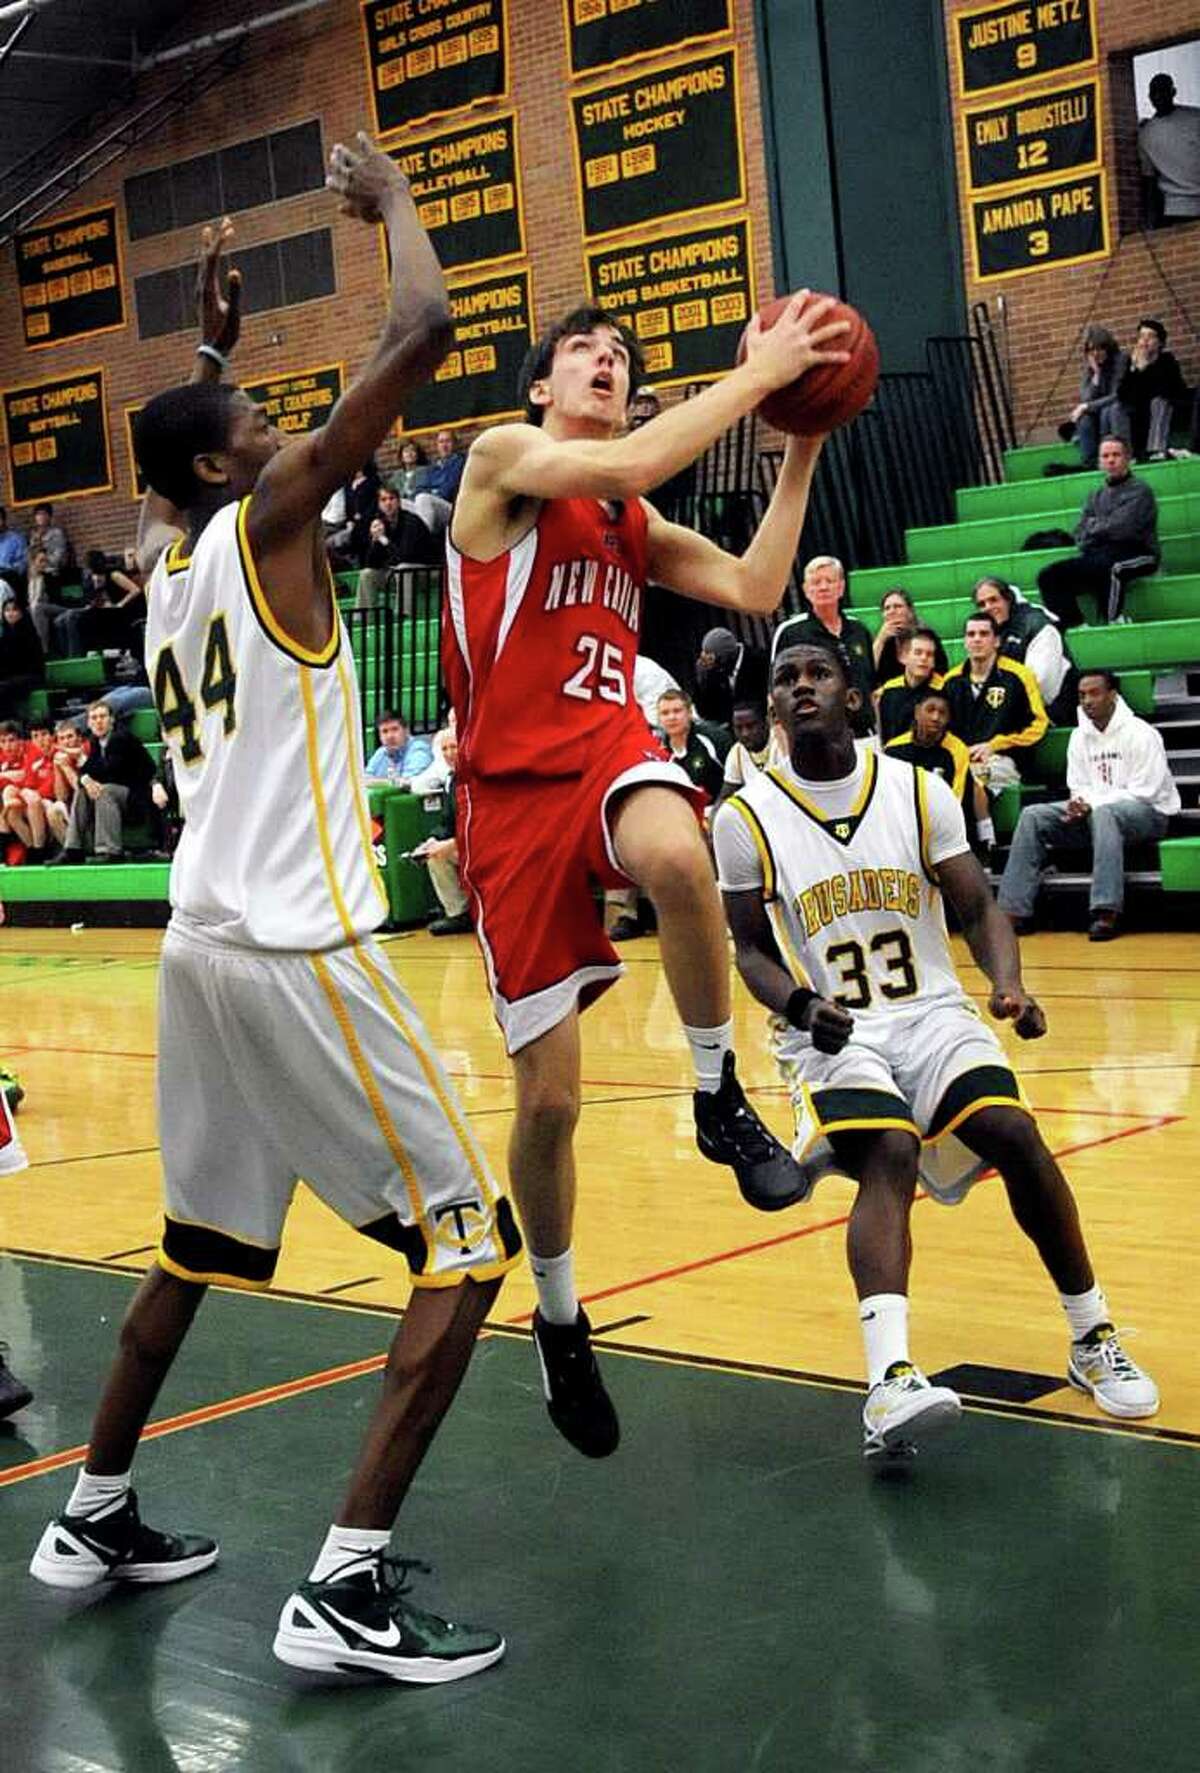 New Canaan's Chris Dewaele puts up a shot as he is defended by Trinity Catholic's Paschal Chukwu, left, and Kevin Leumene, right, during Friday's game in Stamford on January 20, 2012.